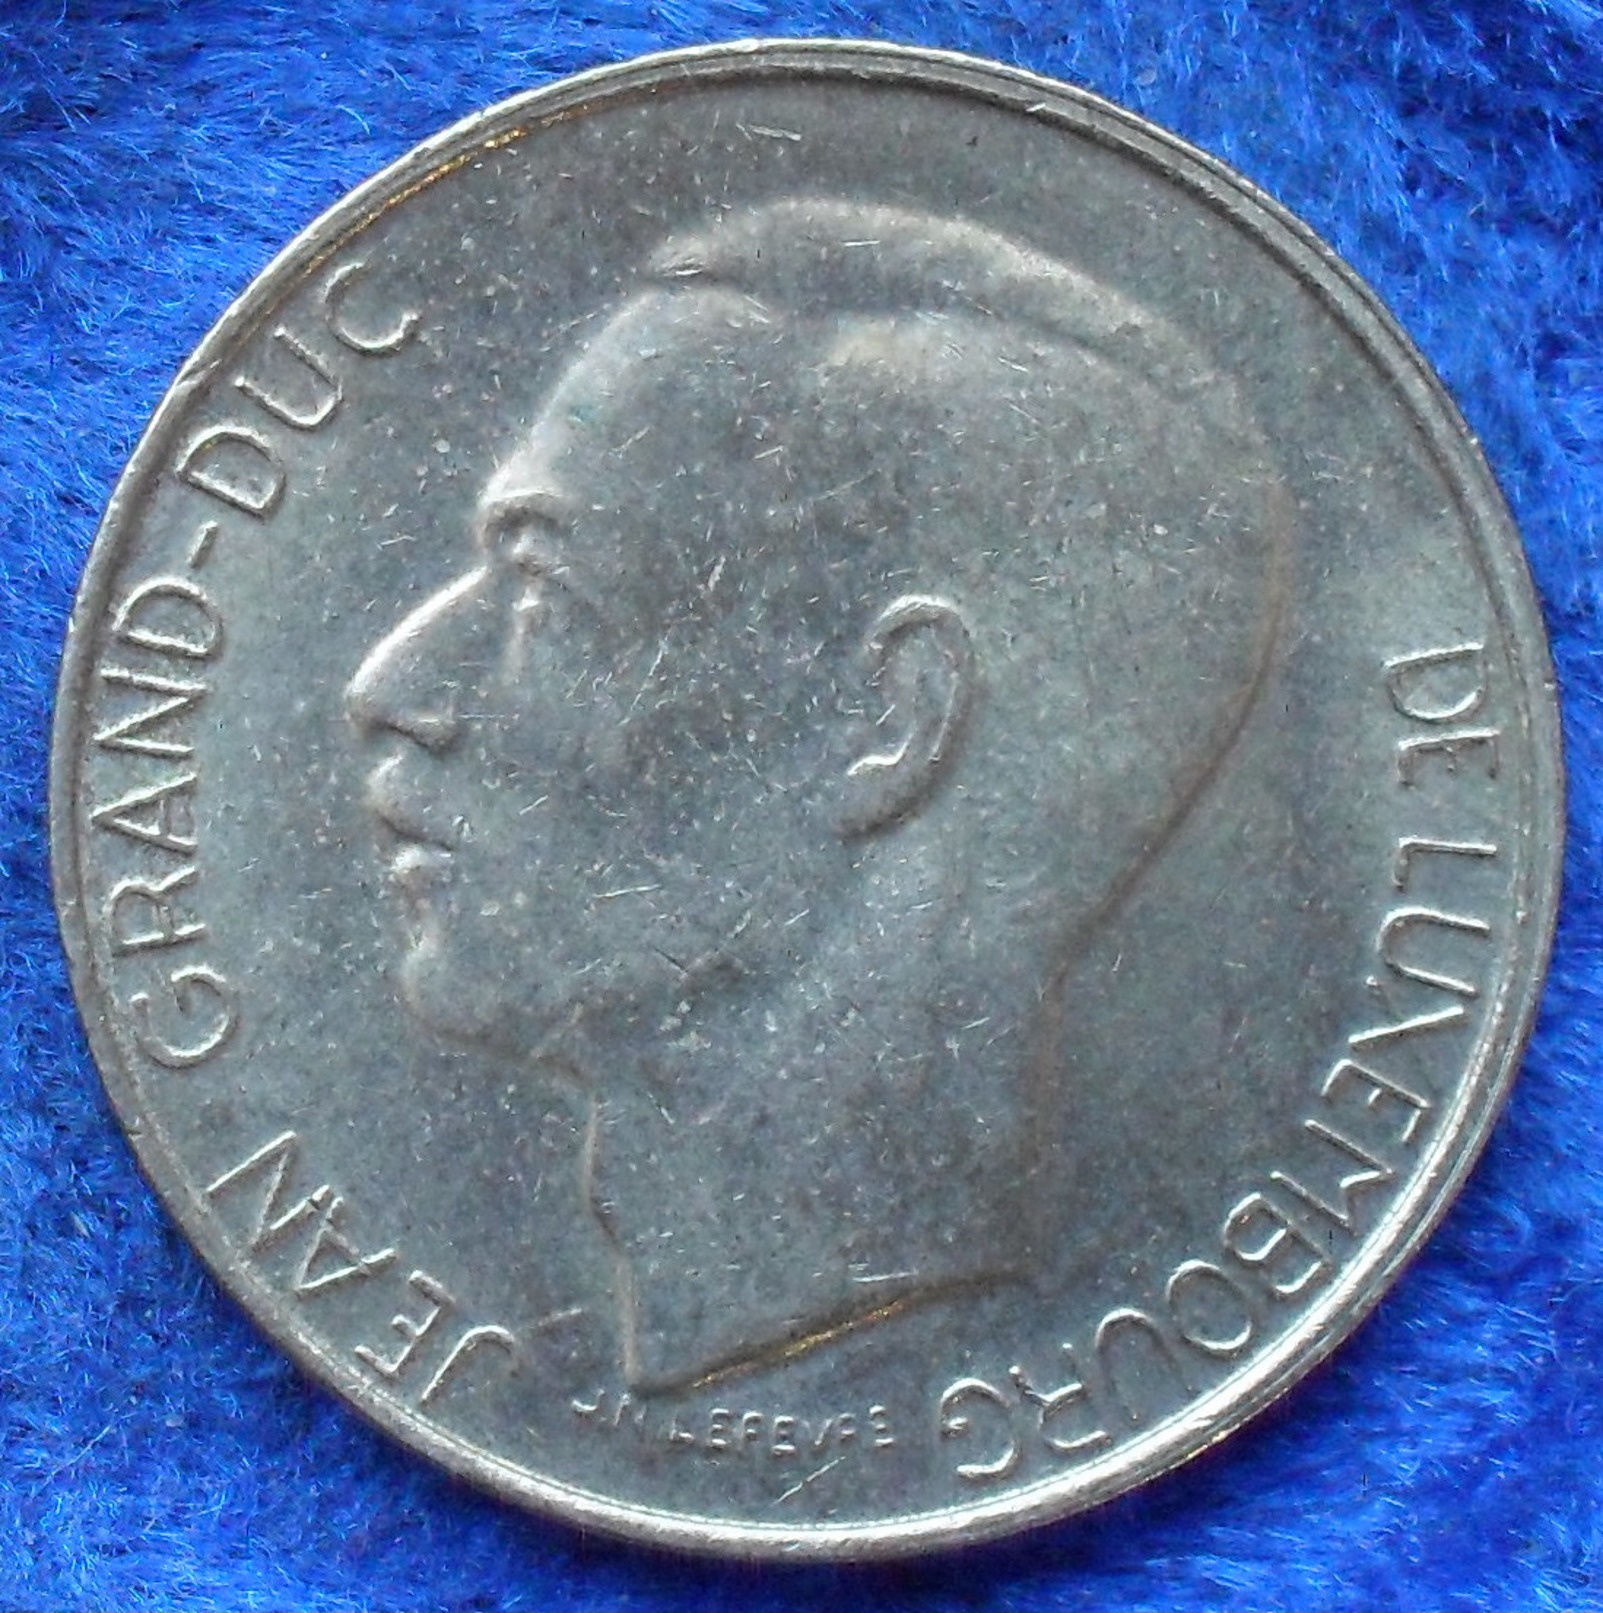 LUXEMBOURG - 5 Francs 1990 KM# 65 Jean (1964-2001) - Edelweiss Coins - Luxembourg